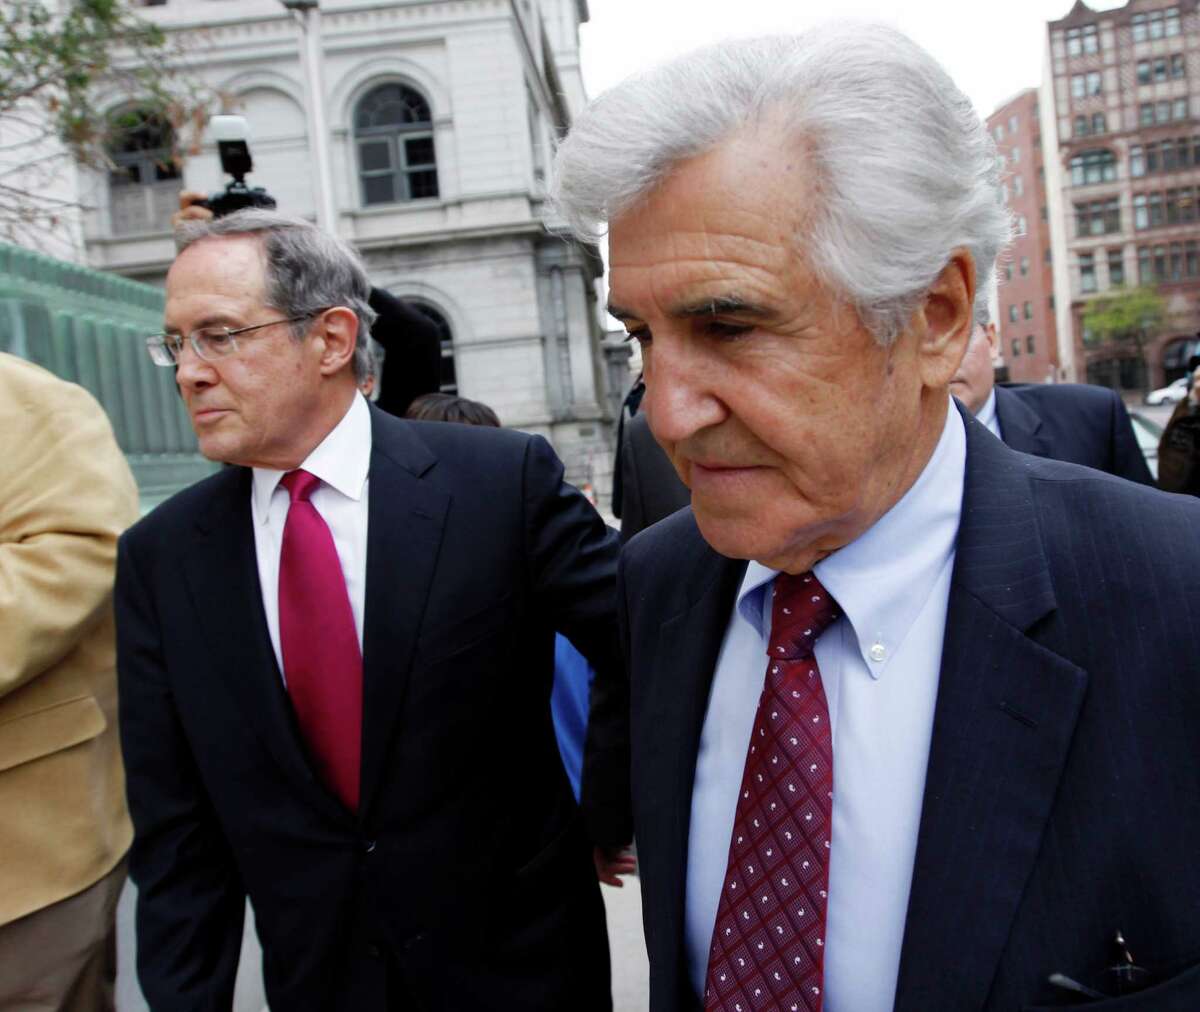 Former state Sen. Joseph Bruno, right, arrives at federal court in Albany, N.Y., with his attorney E. Stewart Jones, on Thursday, May 3, 2012. Defense attorney William Dreyer says he and Bruno have been told be in court Thursday, but haven't been told why. Federal prosecutors have said they'd pursue a new indictment after the appeals court last year rejected convictions of Bruno, now 83, on two counts of honest services fraud. (AP Photo / Mike Groll)